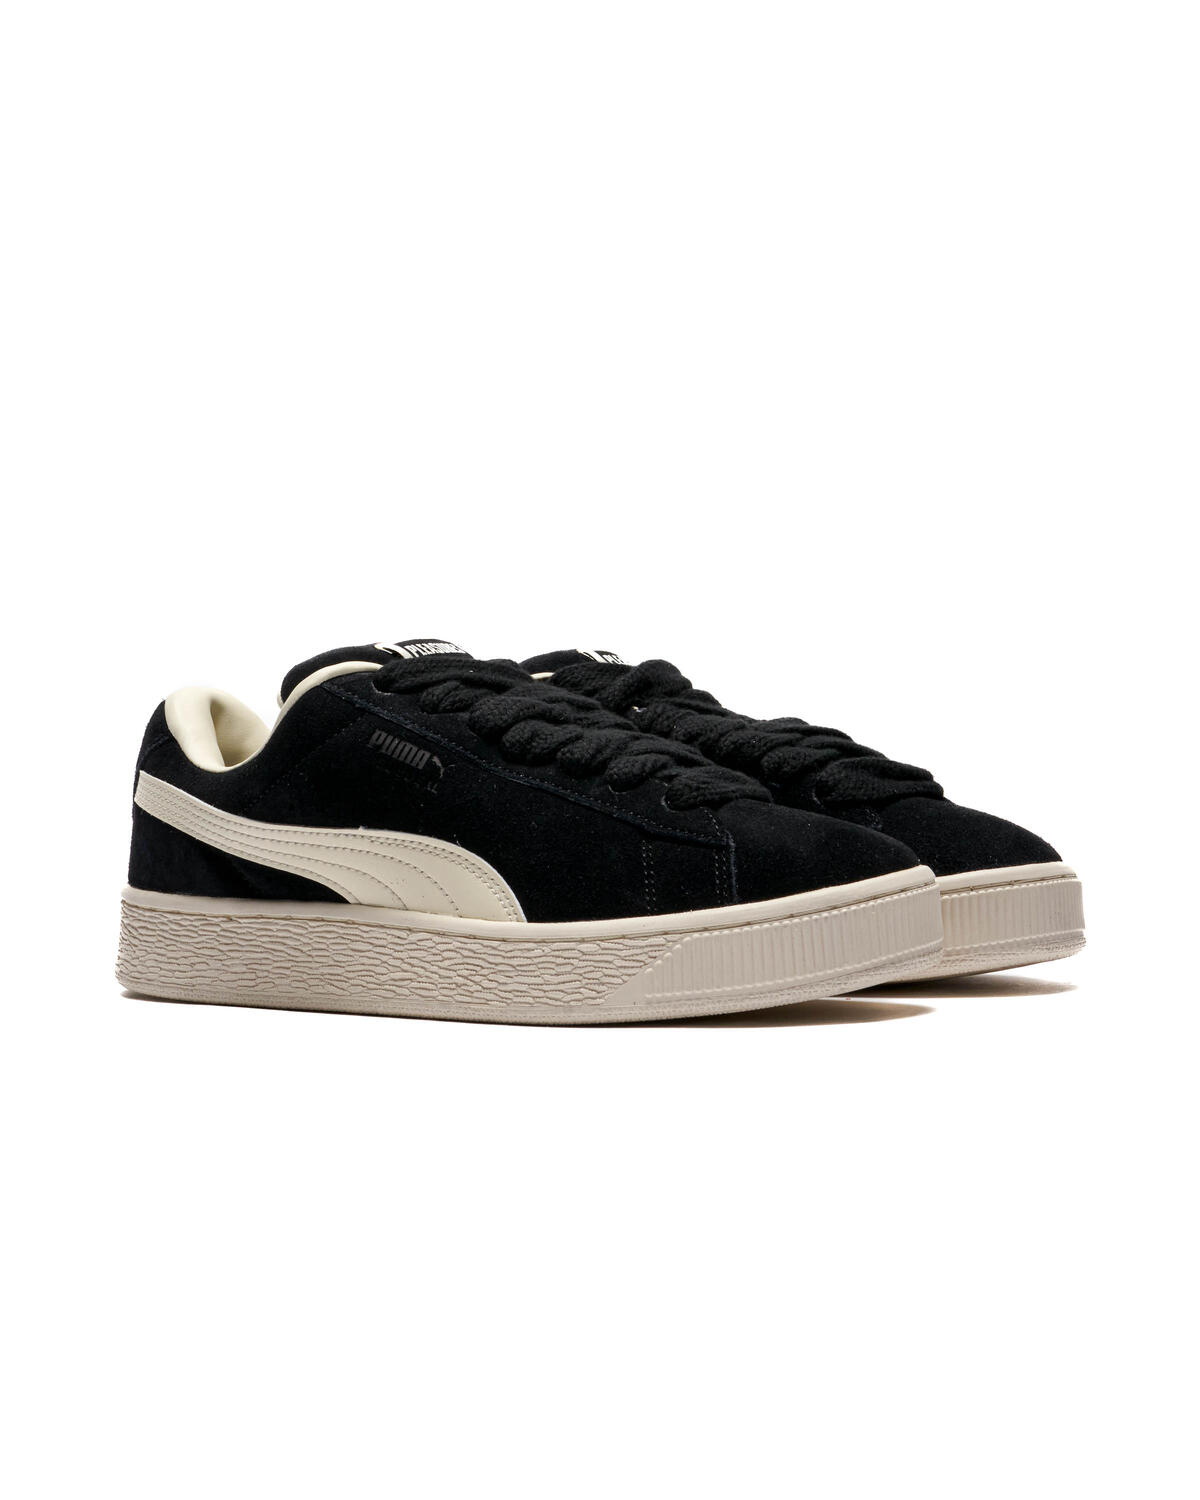 Puma x Pleasures Suede XL. An oversized take on the beloved classic from 2  companies who know a thing or two about living large. Launches